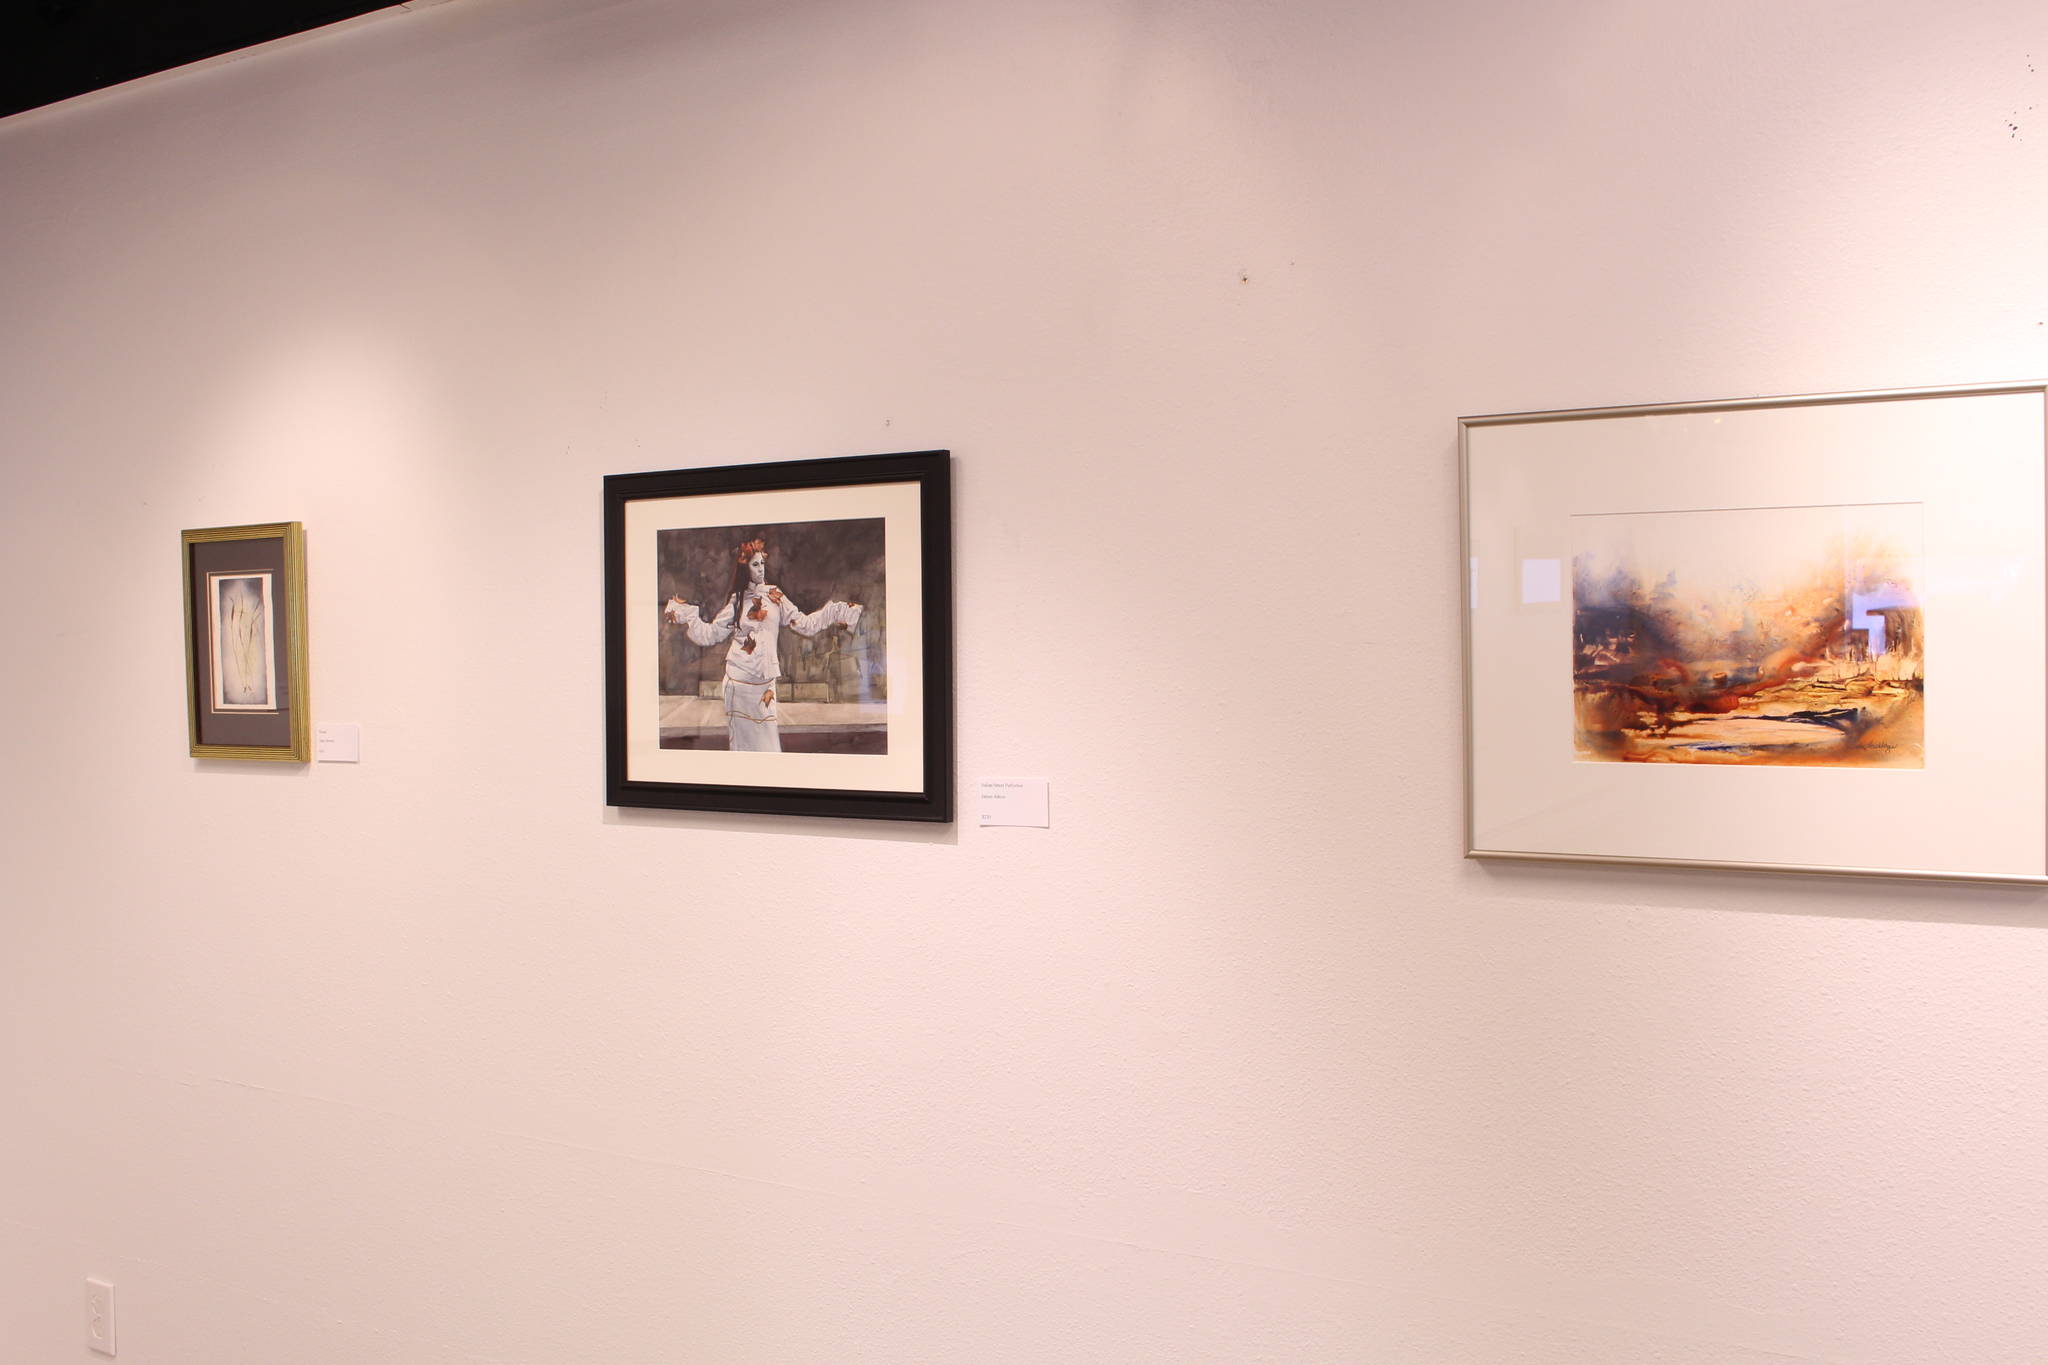 Watercolor paintings by Janie Stewart, James Adcox and Melinda Hershberger are seen on display at the Kenai Fine Art Center in Kenai, Alaska on Feb. 4, 2020. (Photo by Brian Mazurek/Peninsula Clarion)